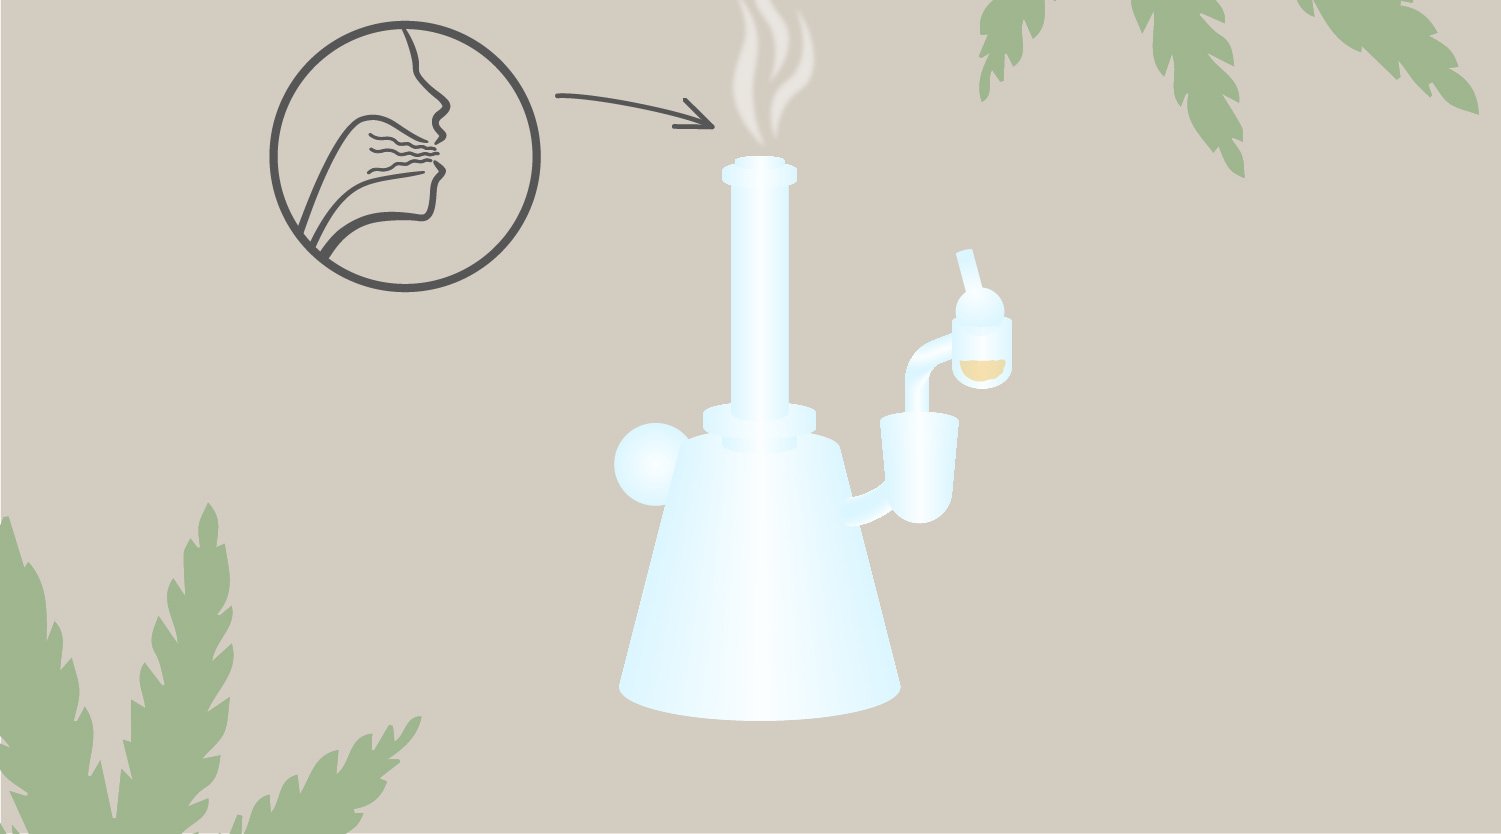 Step-by-step guide to dabbing